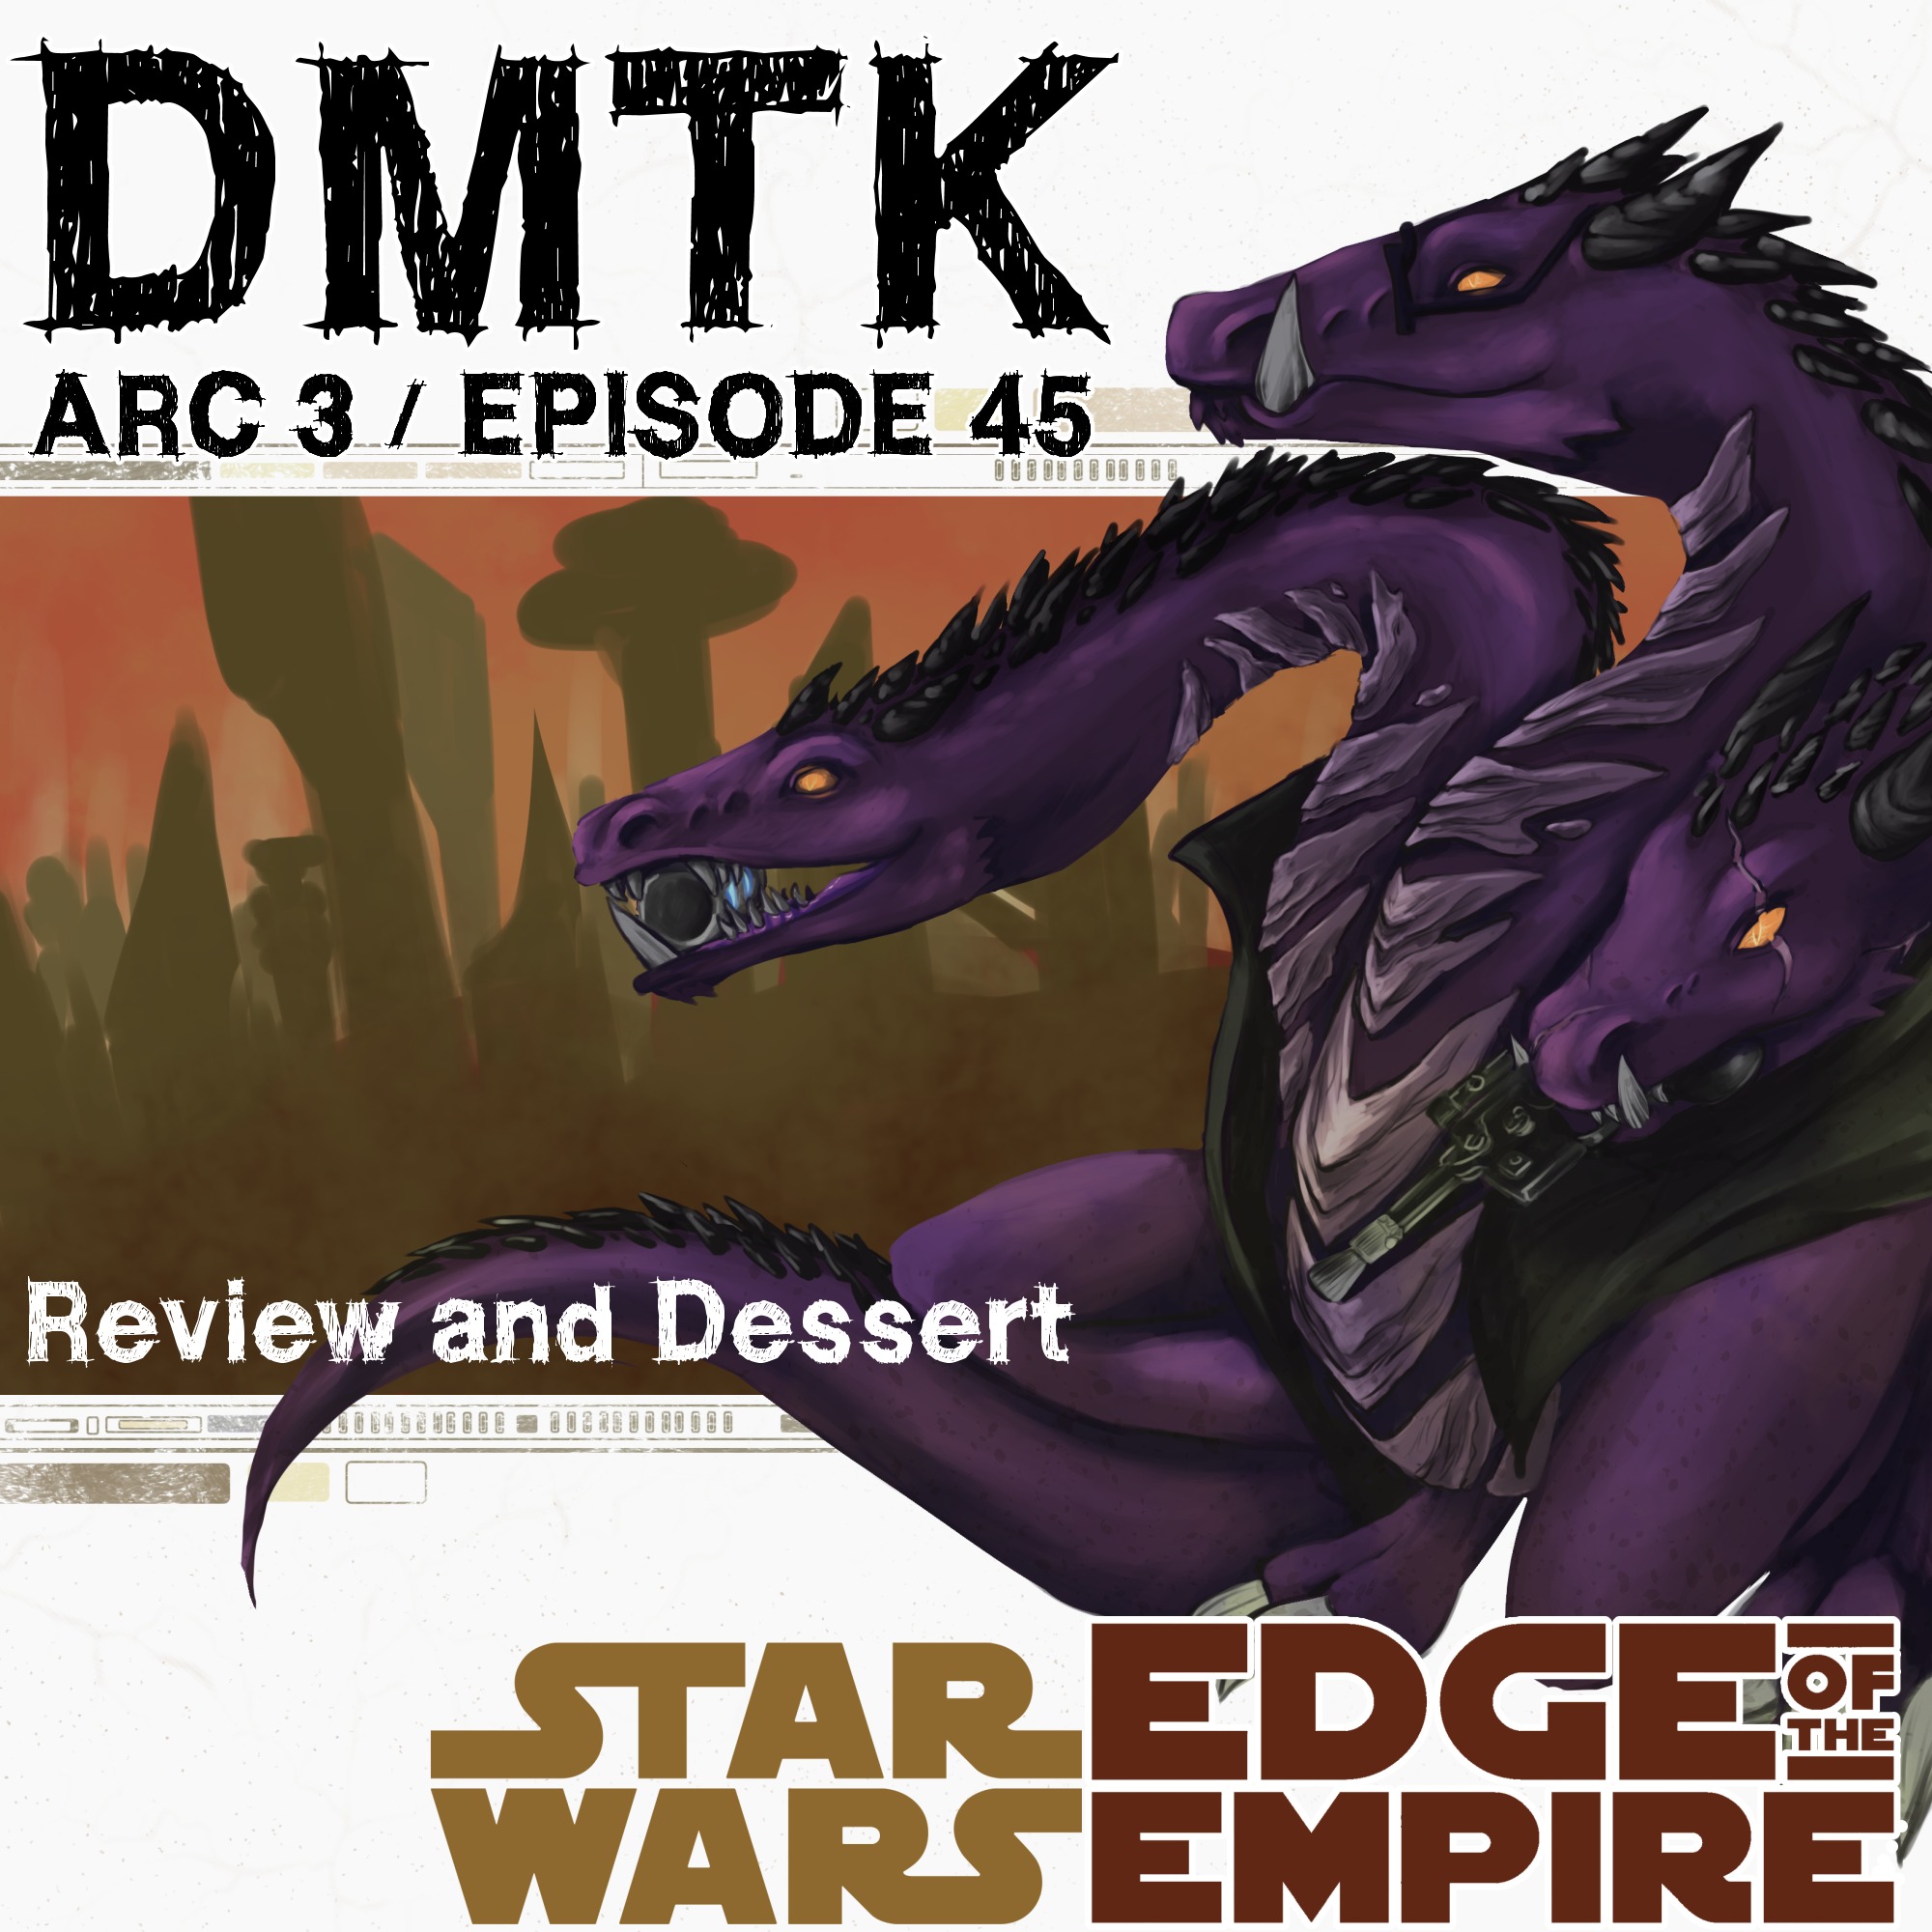 Arc 3 / Episode 45 - Star Wars EotE - Review and Dessert